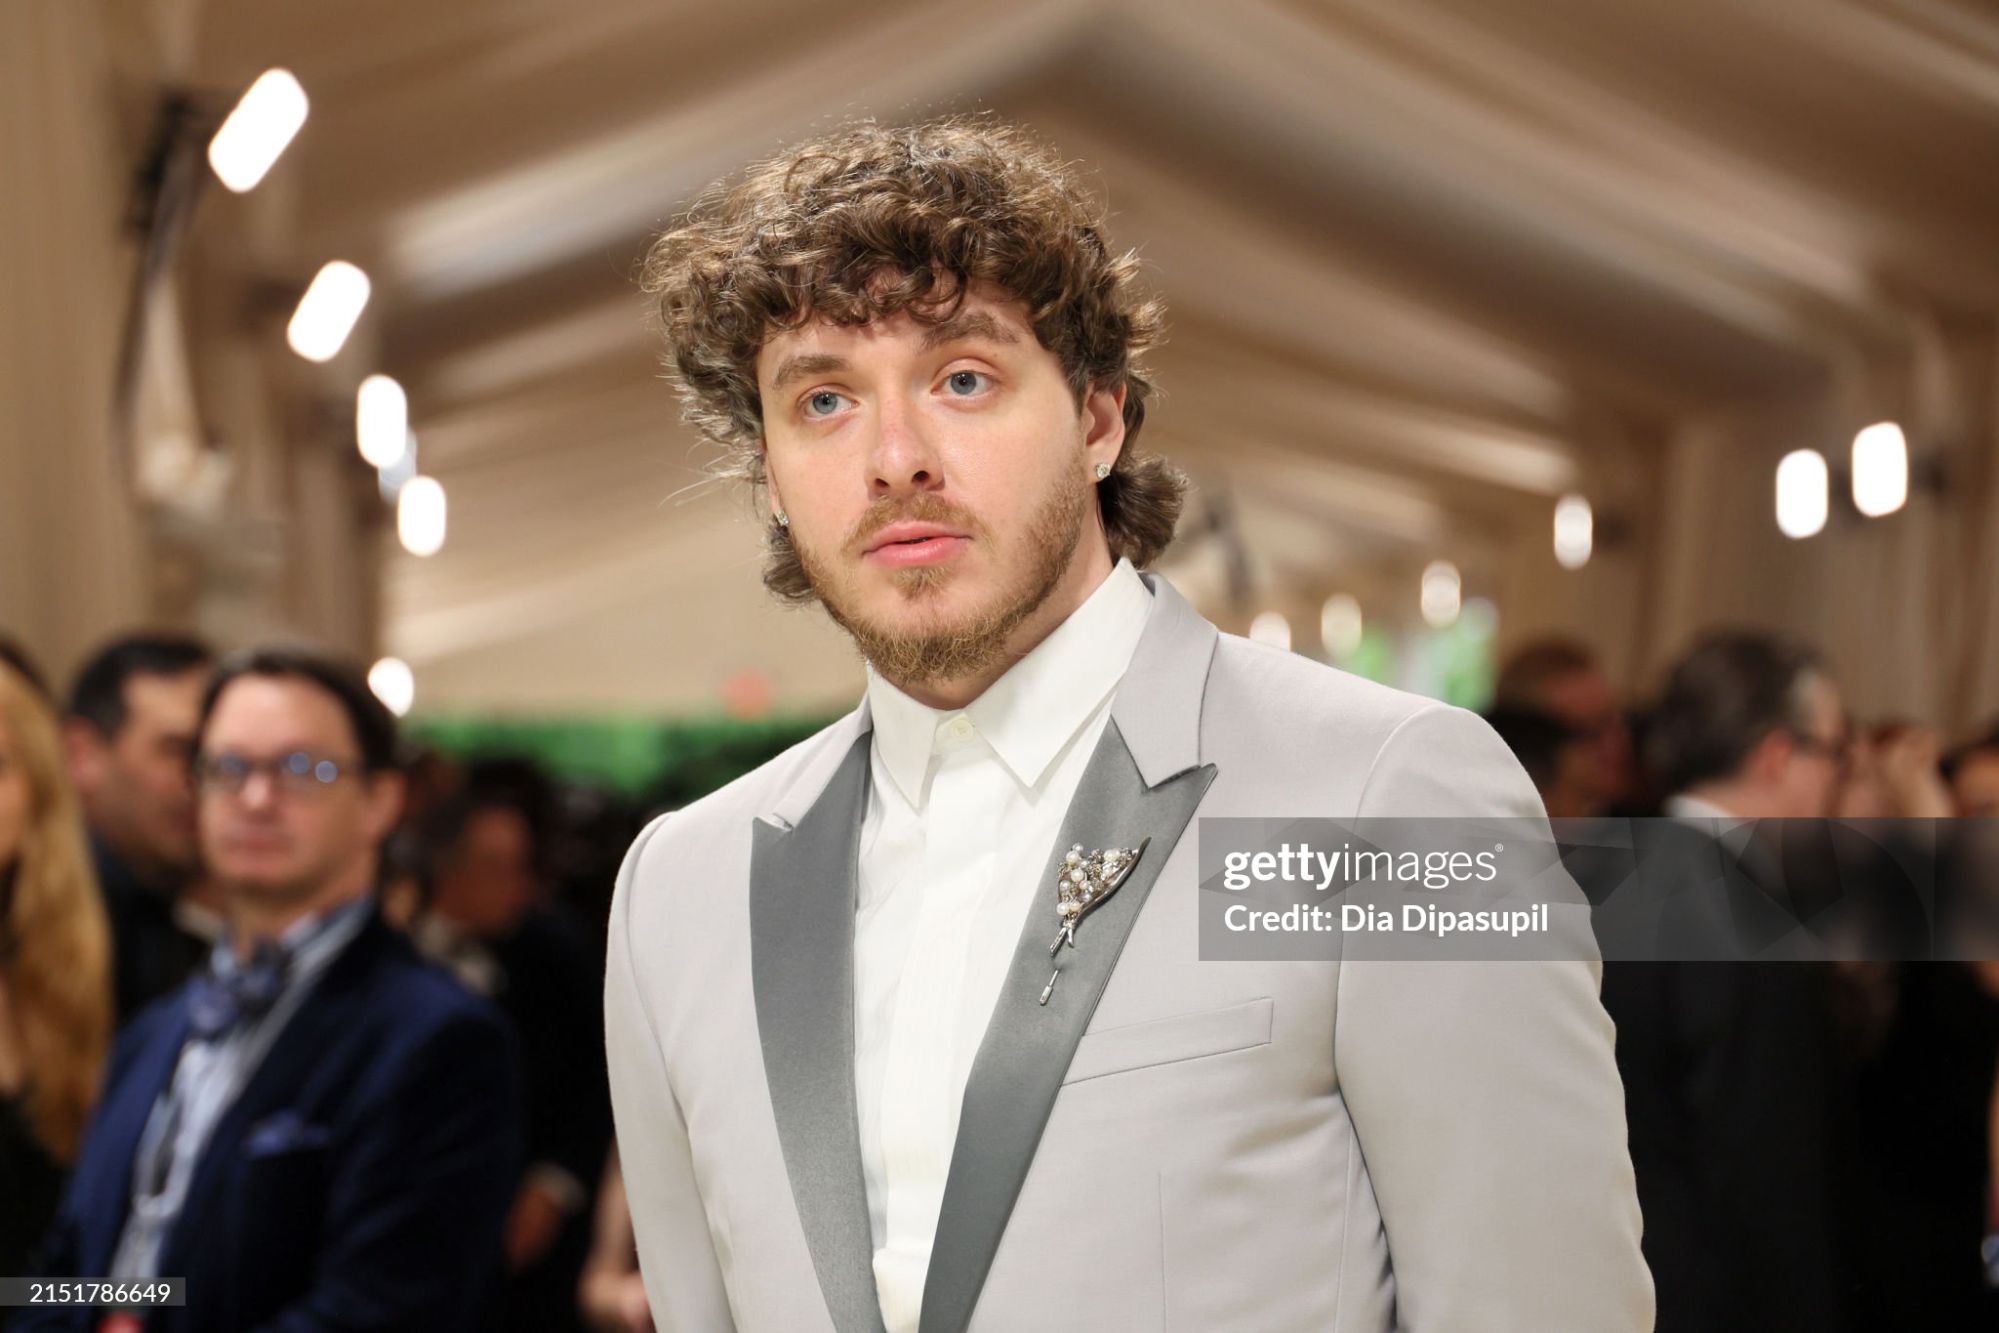 gettyimages-2151786649-2048x2048.jpg